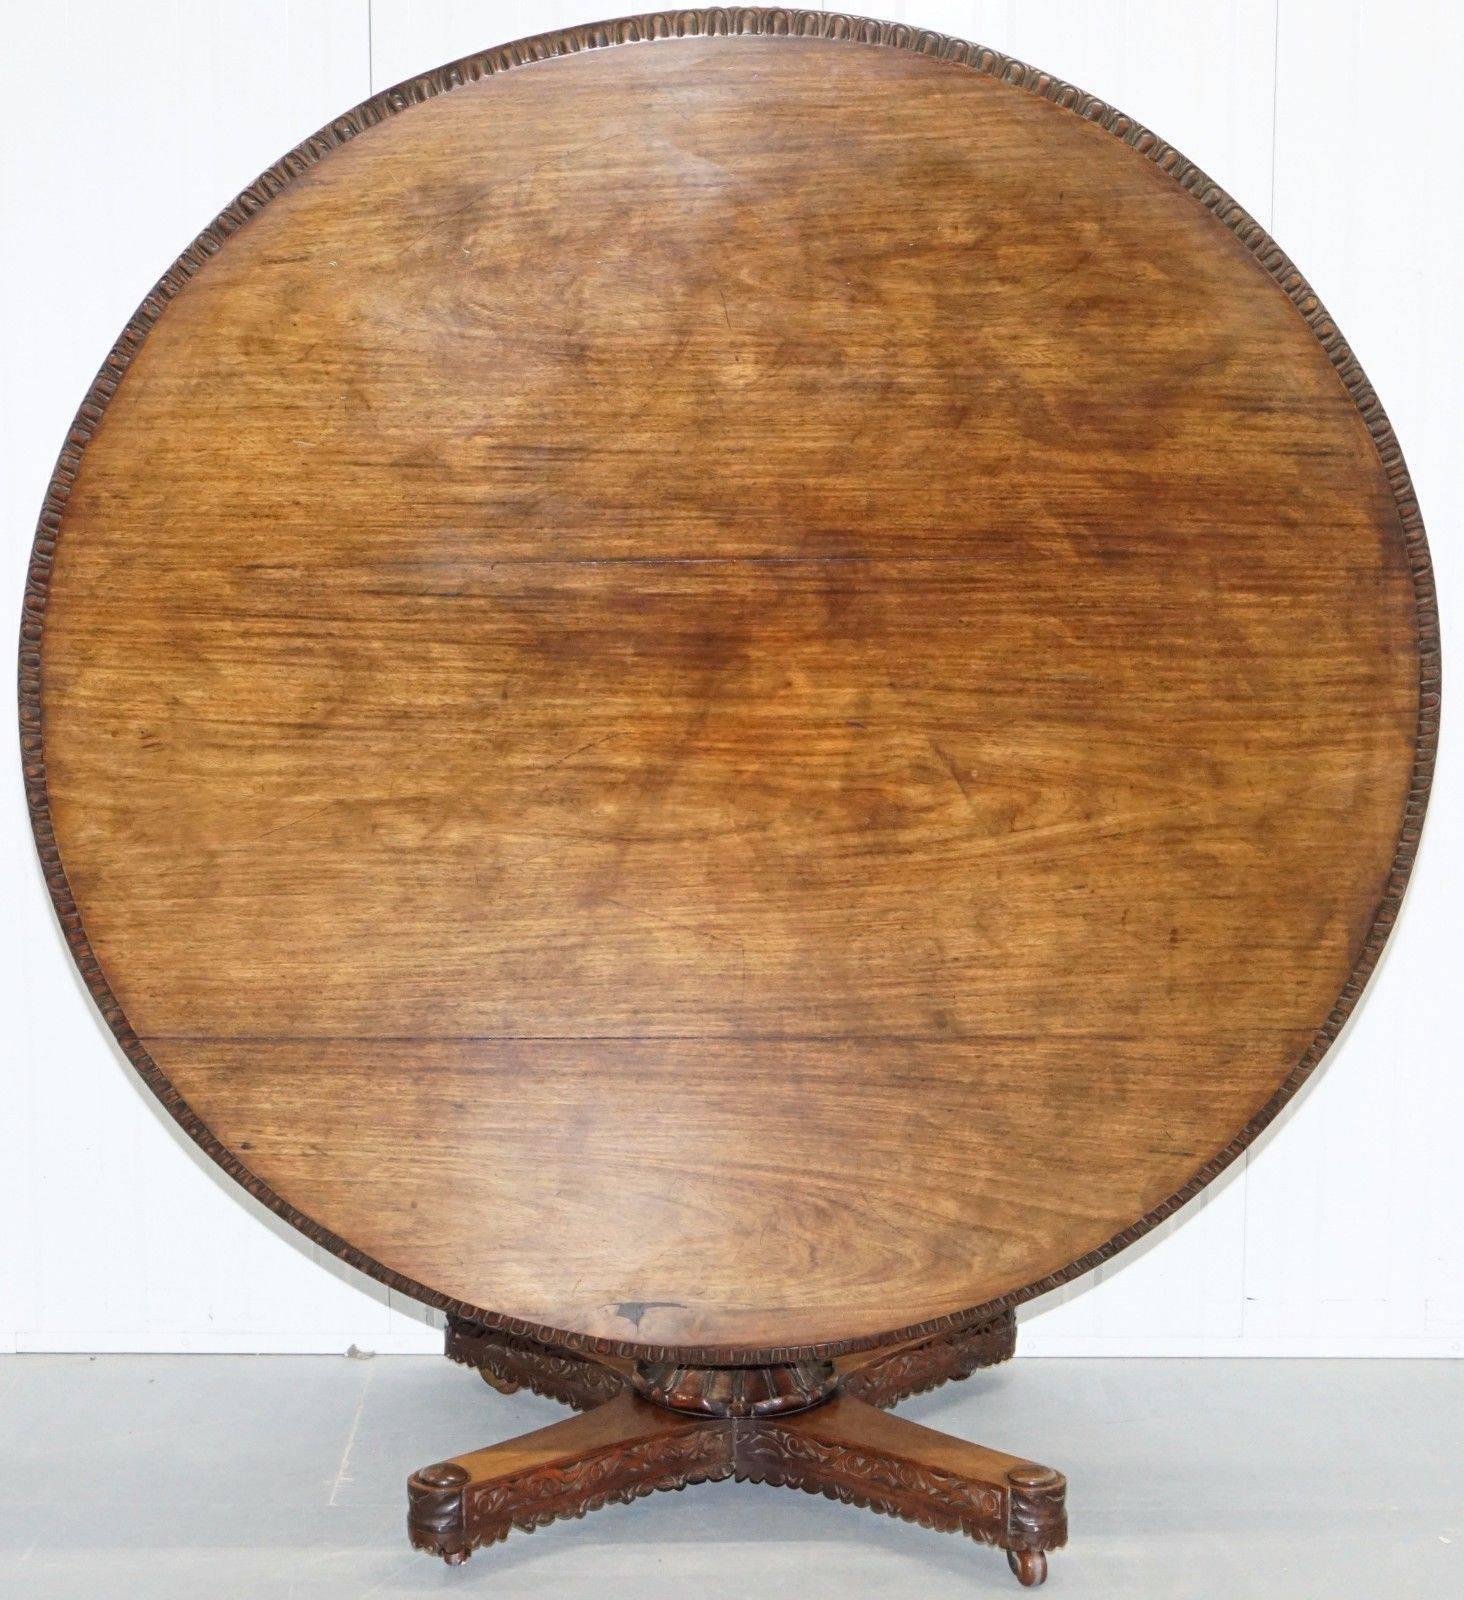 We are delighted to offer for sale this very rare 19th century circa 1860 Anglo-Indian hand carved wood Padouk roundtable

This is pretty much one of the best looking tables you will ever see, the detailing is exquisite, the patina of the timber